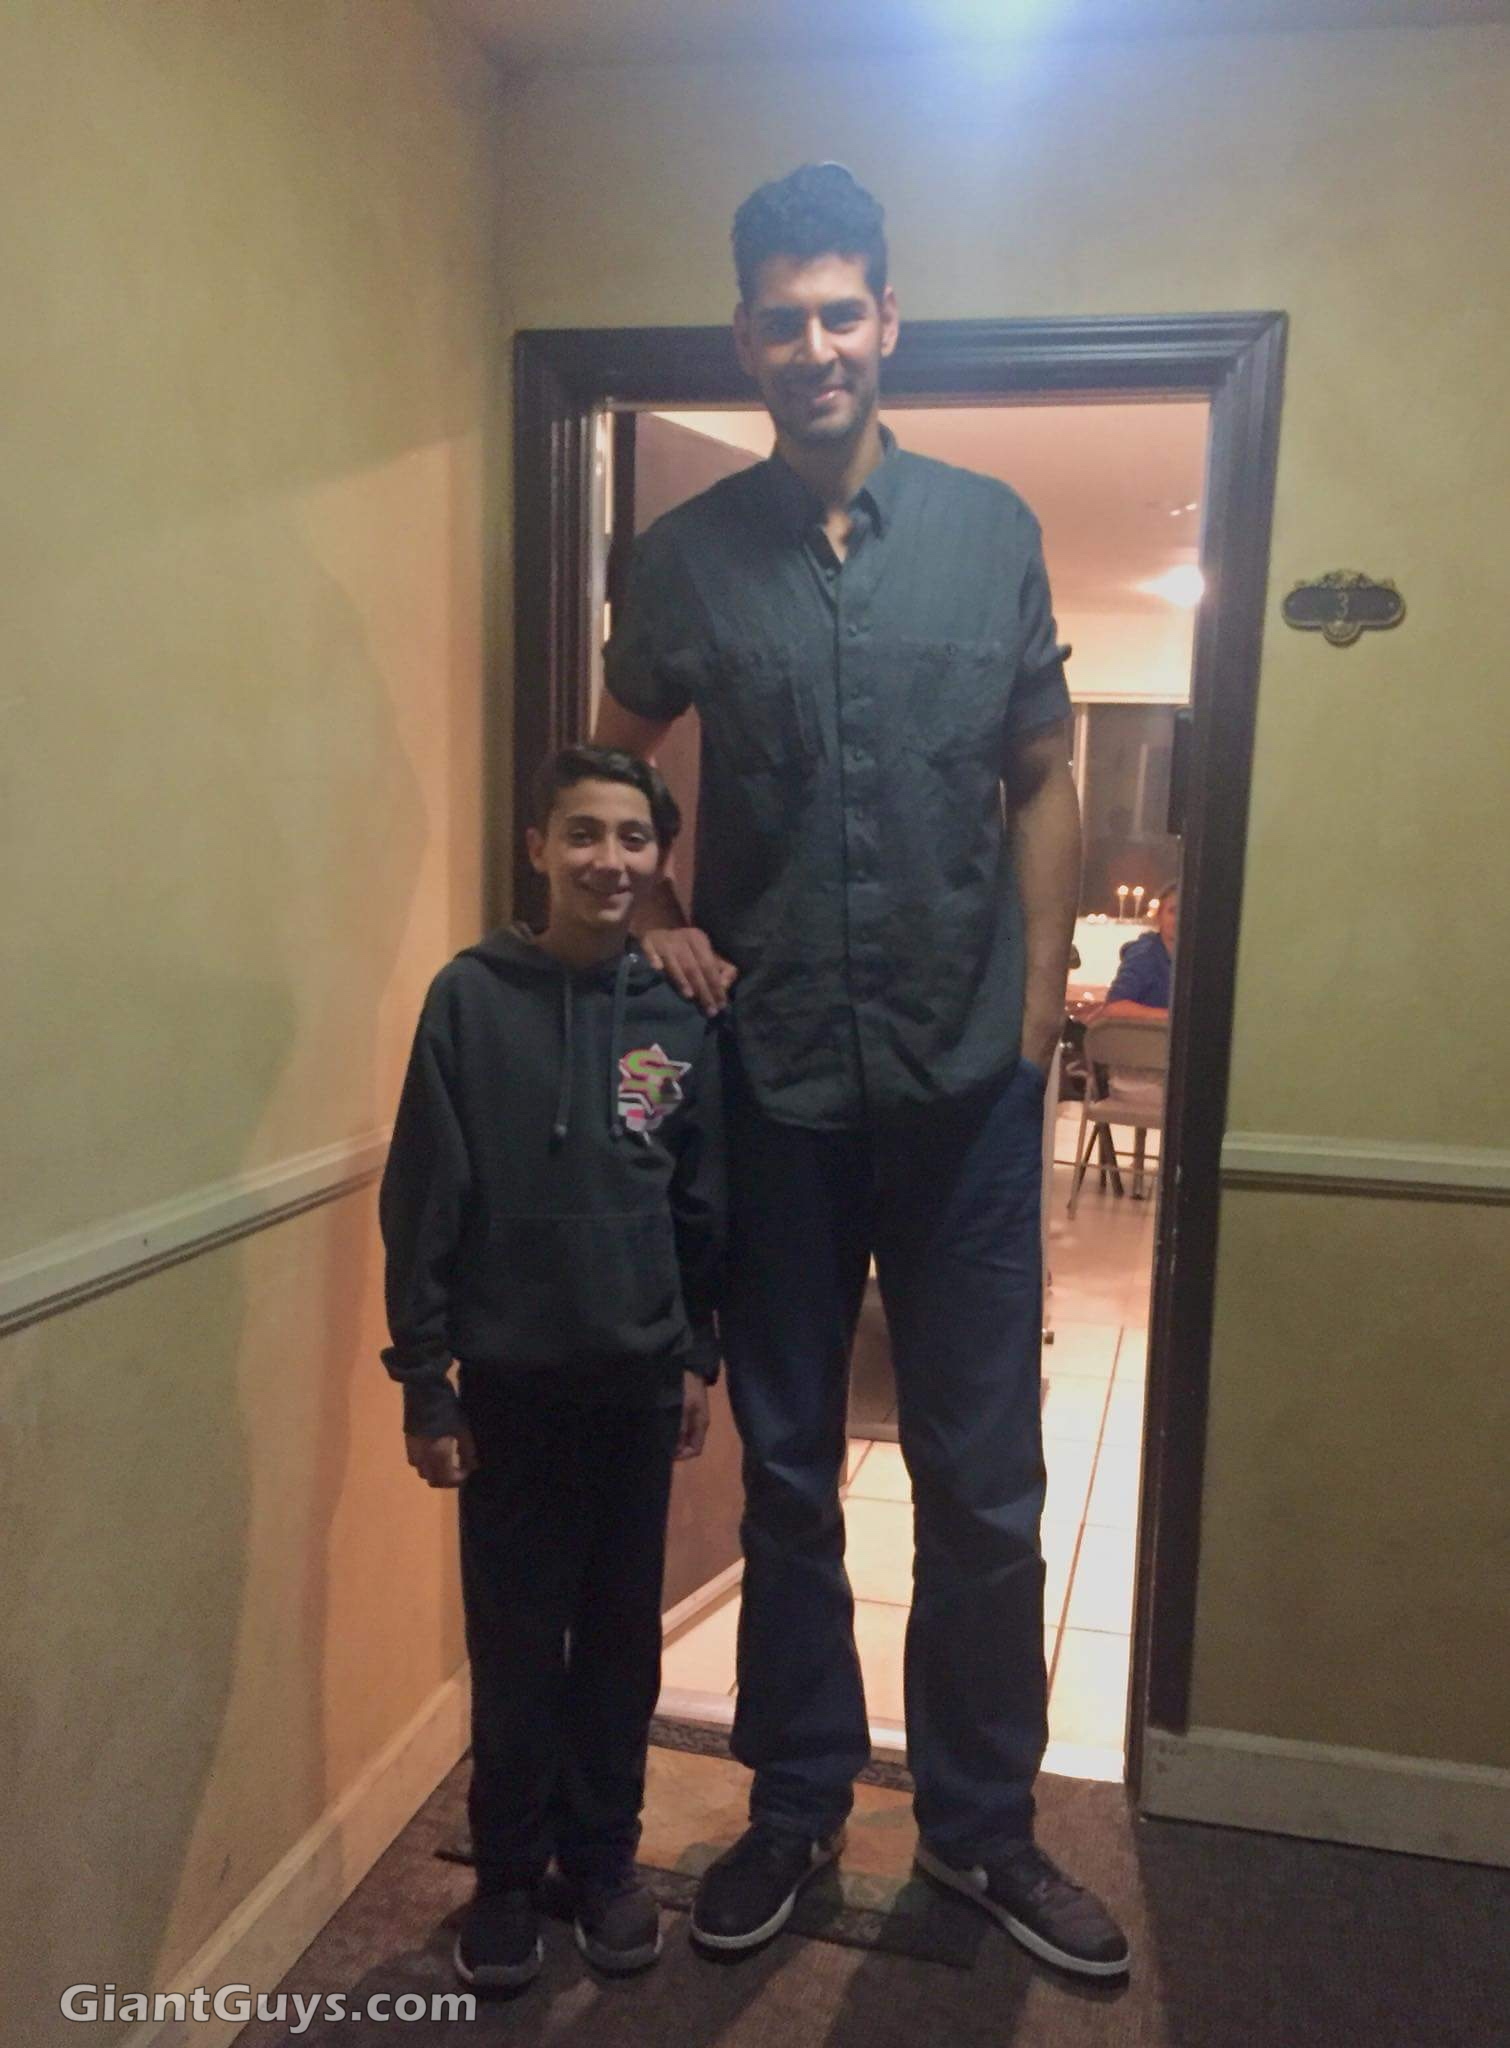 7ft1 person towers over his tiny friend